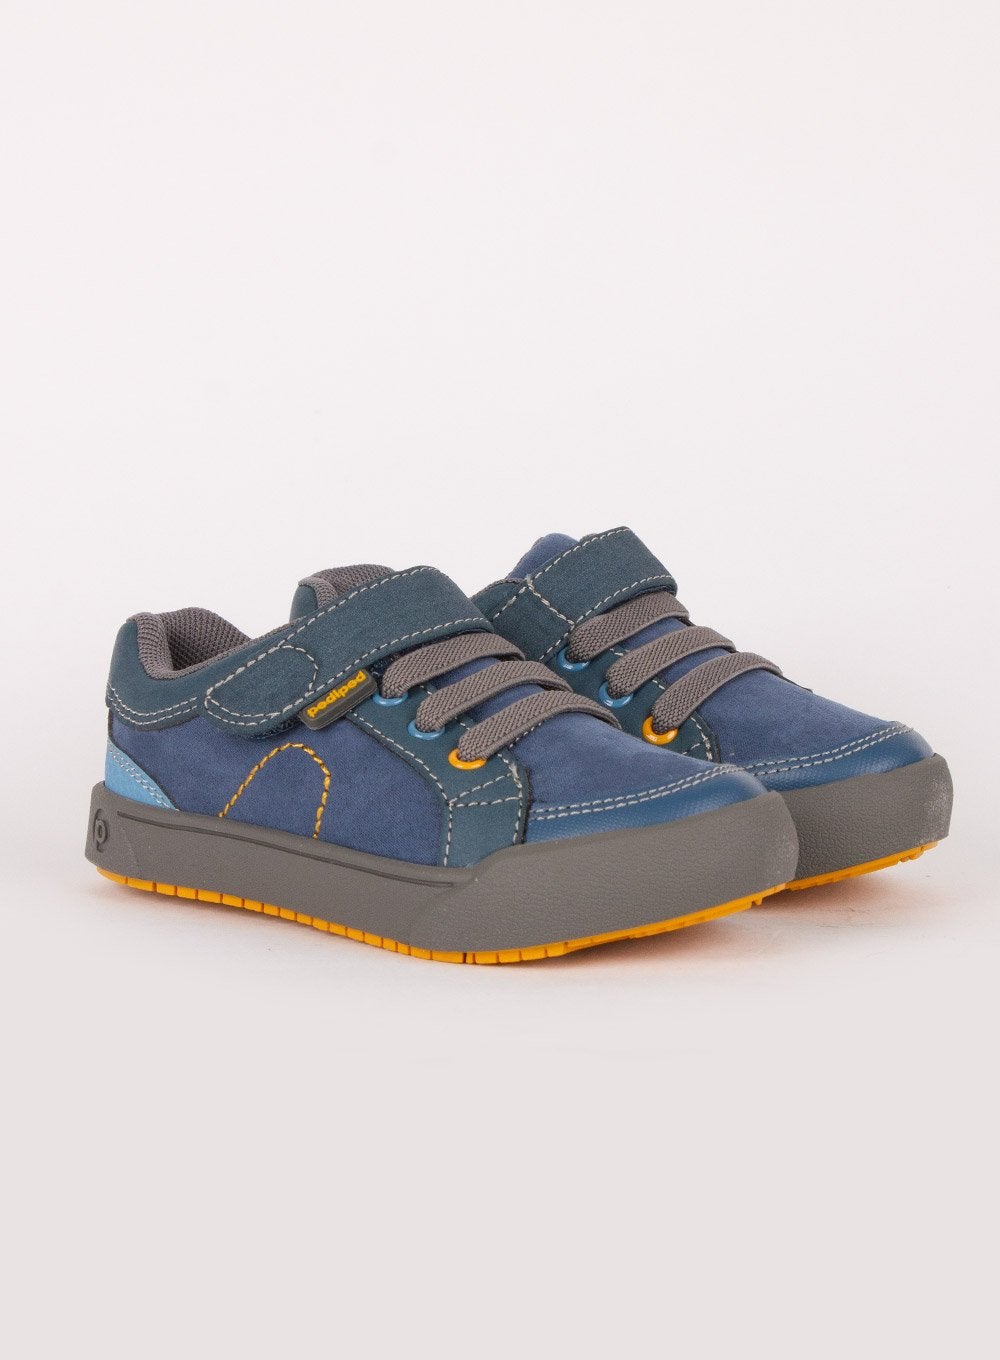 Pediped Trainers Pediped Dani B Trainers in Navy - Trotters Childrenswear